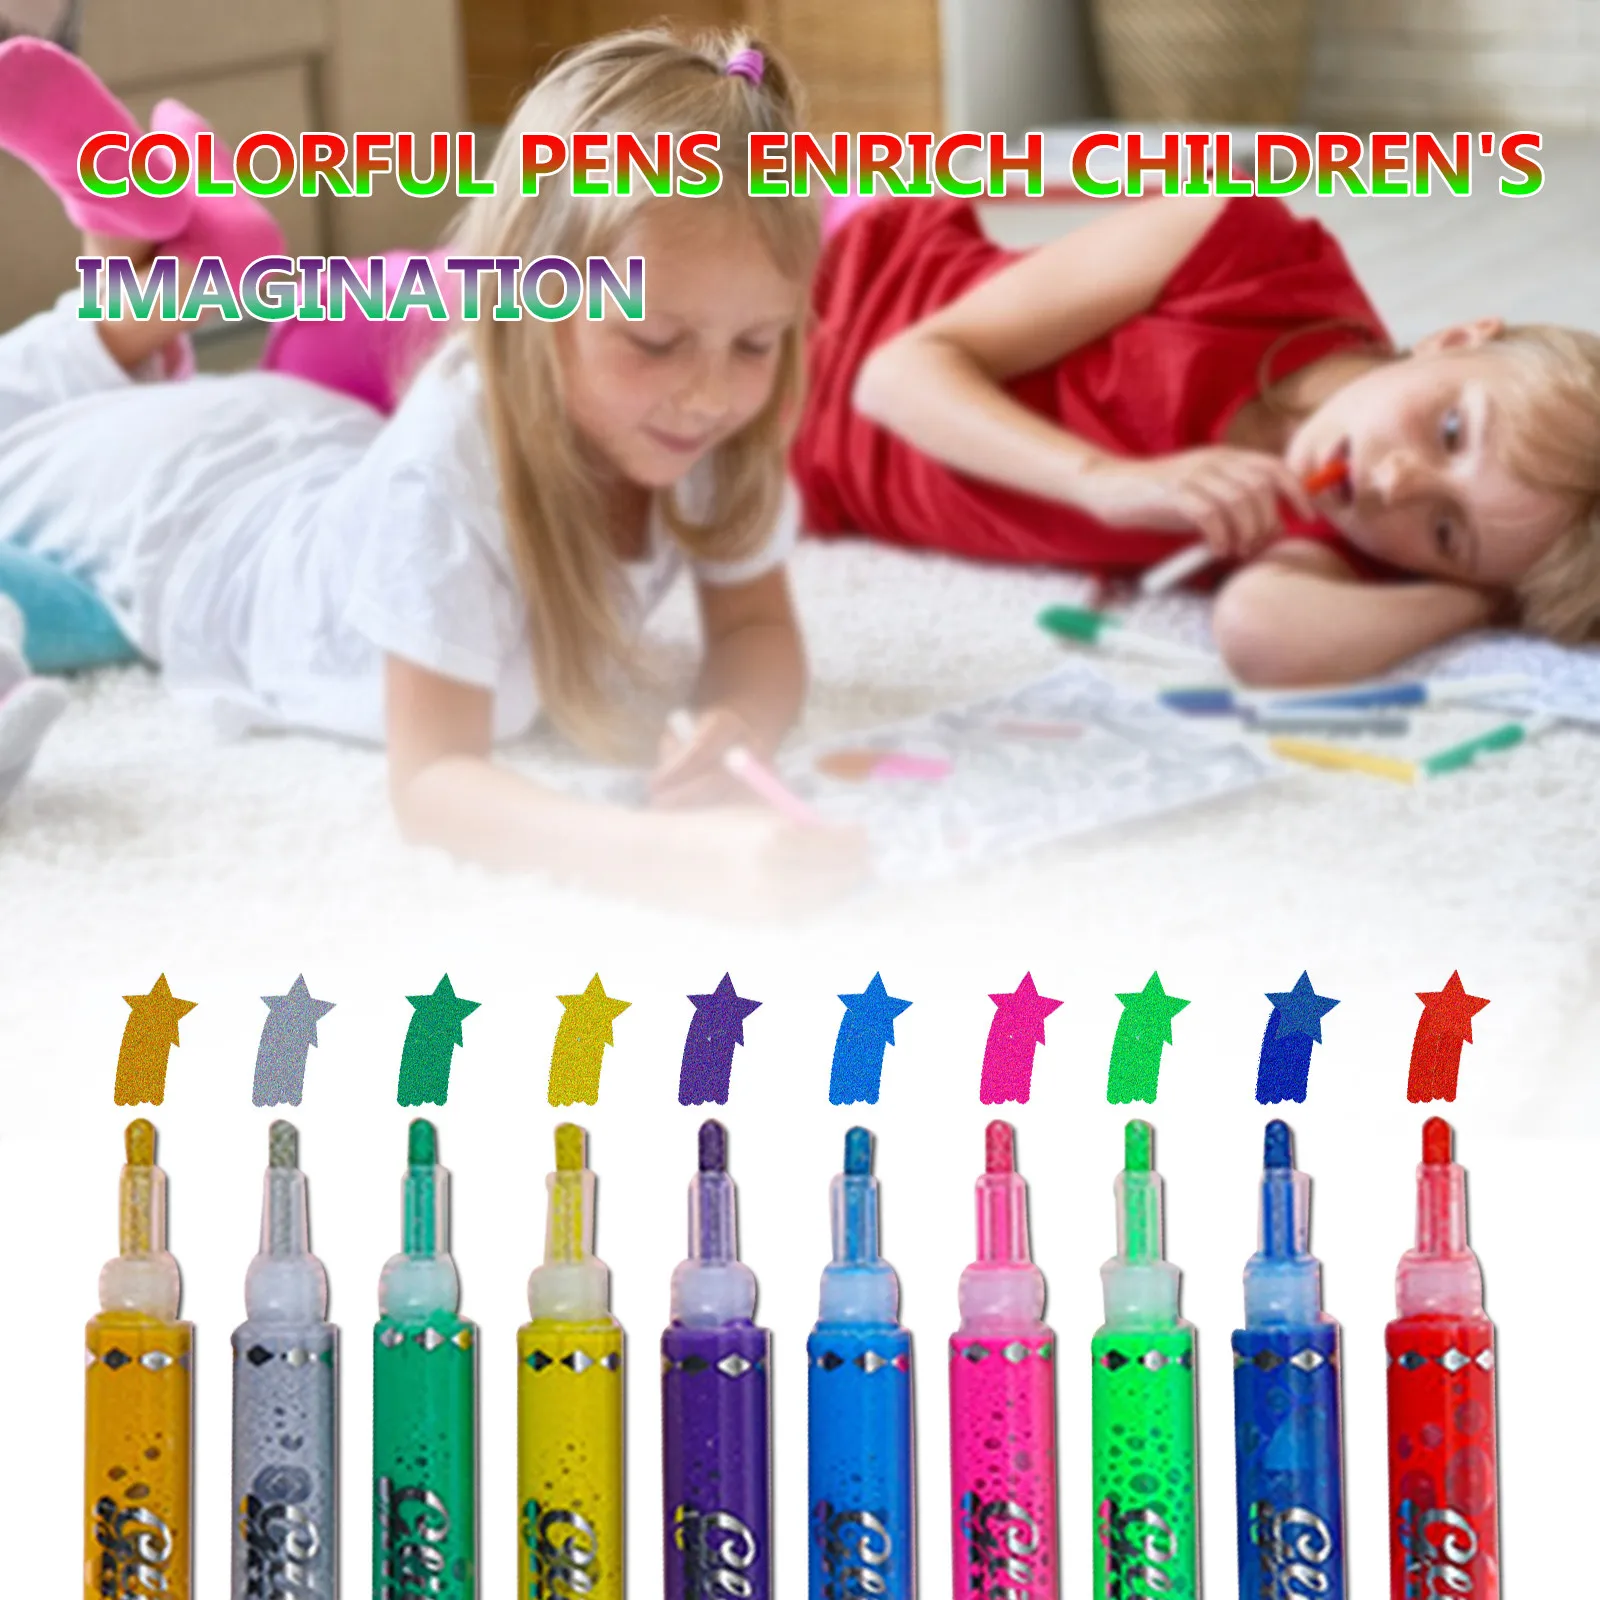 Kids Students Drawing Pens Hand Account Pen Dream Pen Hand-Painted Stationery Highlighter Pen,1-12 Pcs Pens for Painting,Child Color Pen Set Marker Watercolor Brush Oily Colored Drawing Hook Line Pen 